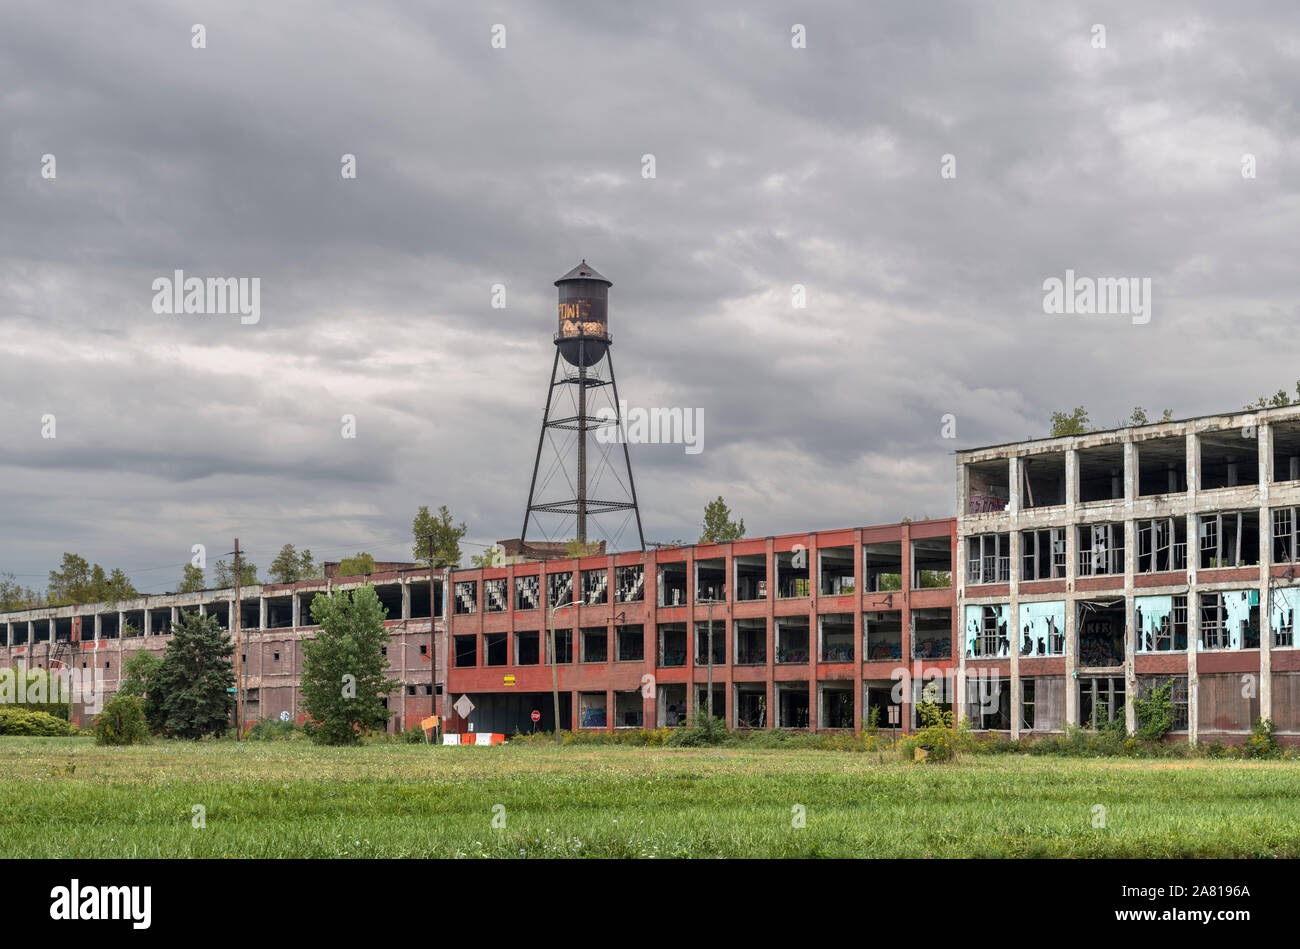 View from East Grand Boulevard of the ruins of the Packard Automotive Plant, a disused and abandoned car plant in Detroit, Michigan, USA Stock Photo